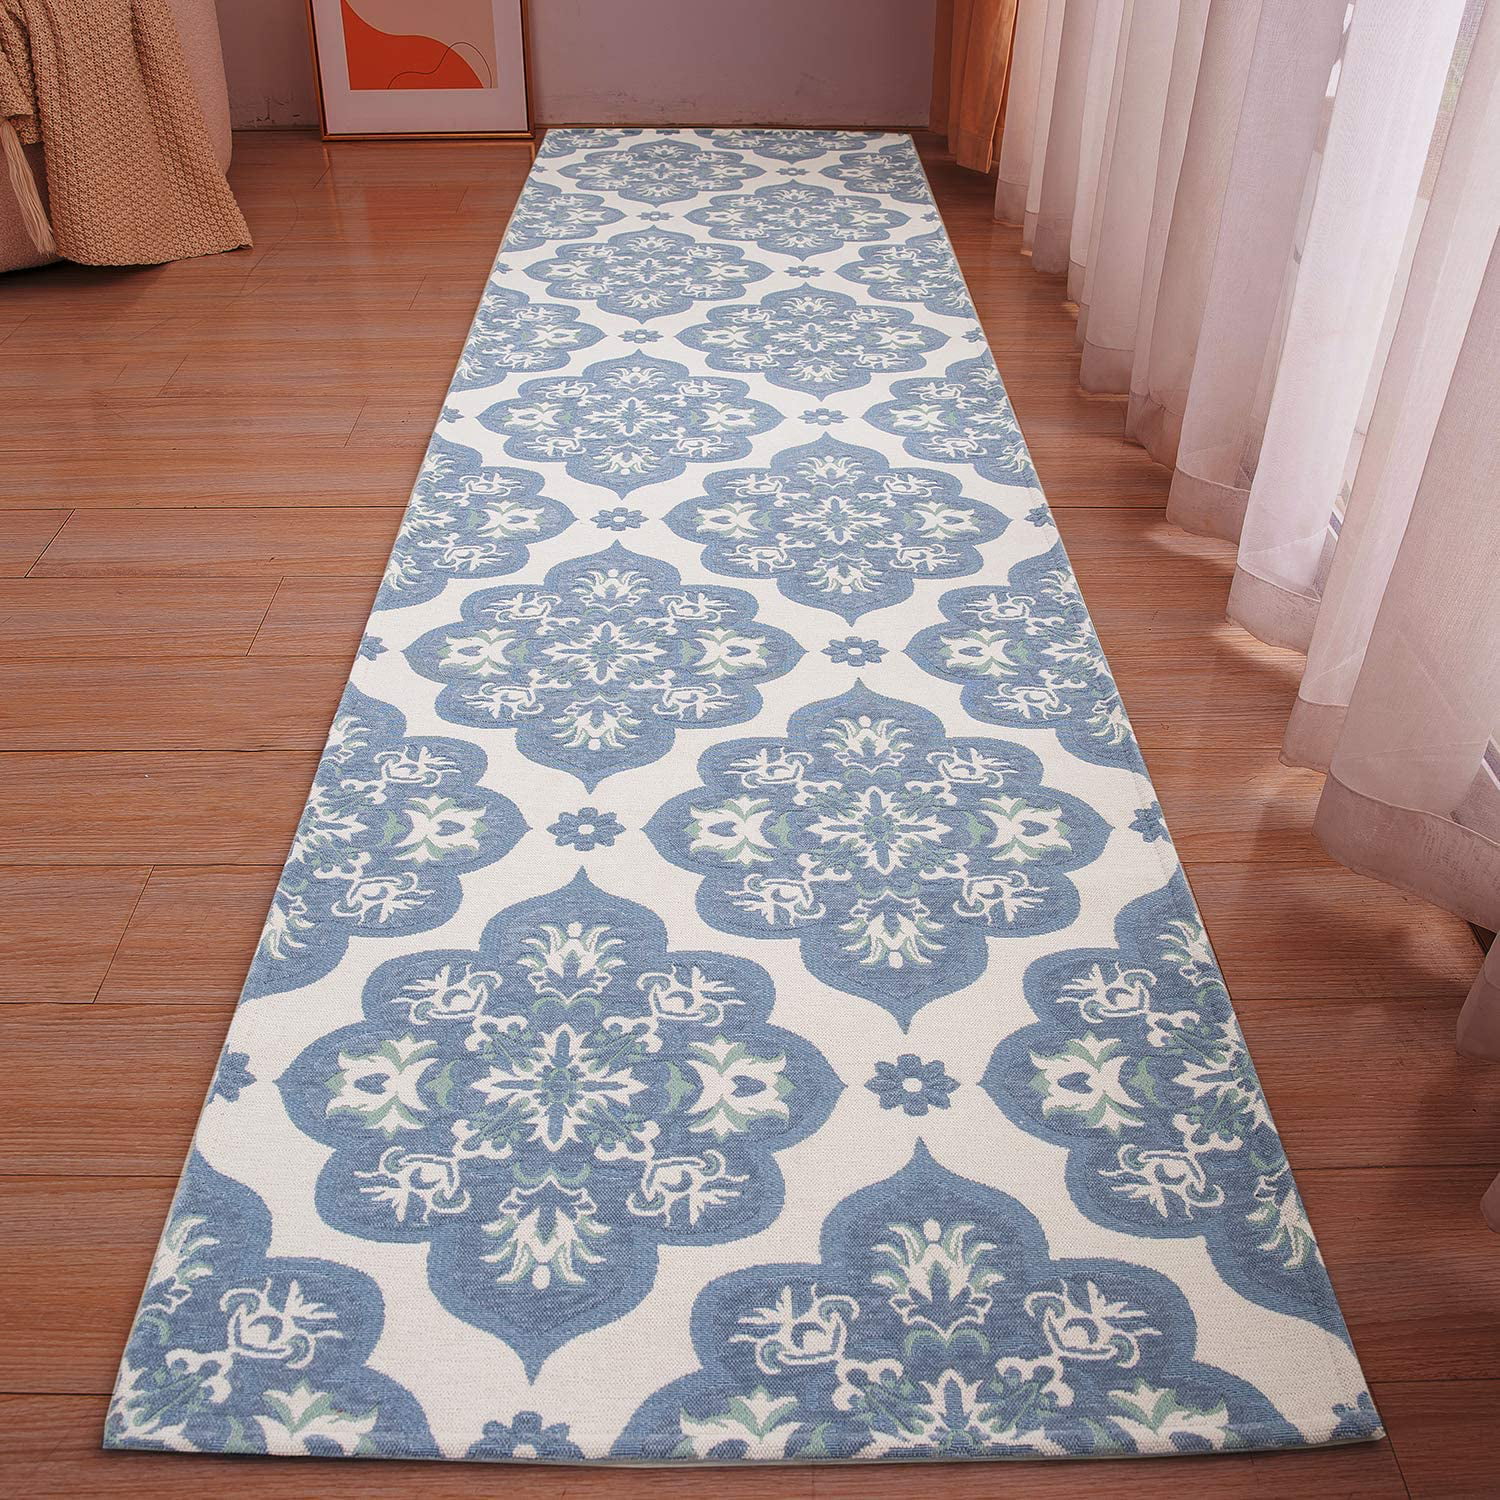  Grey and Blue Long Hallway Runner Rug, Wave Pattern Non-Slip  Area Rugs Mats for Indoor Office Entryway, Contemporary Comfy Cuttable  Carpet ( Size : 1.4x3.5m/4.6x11.5ft ) : Home & Kitchen